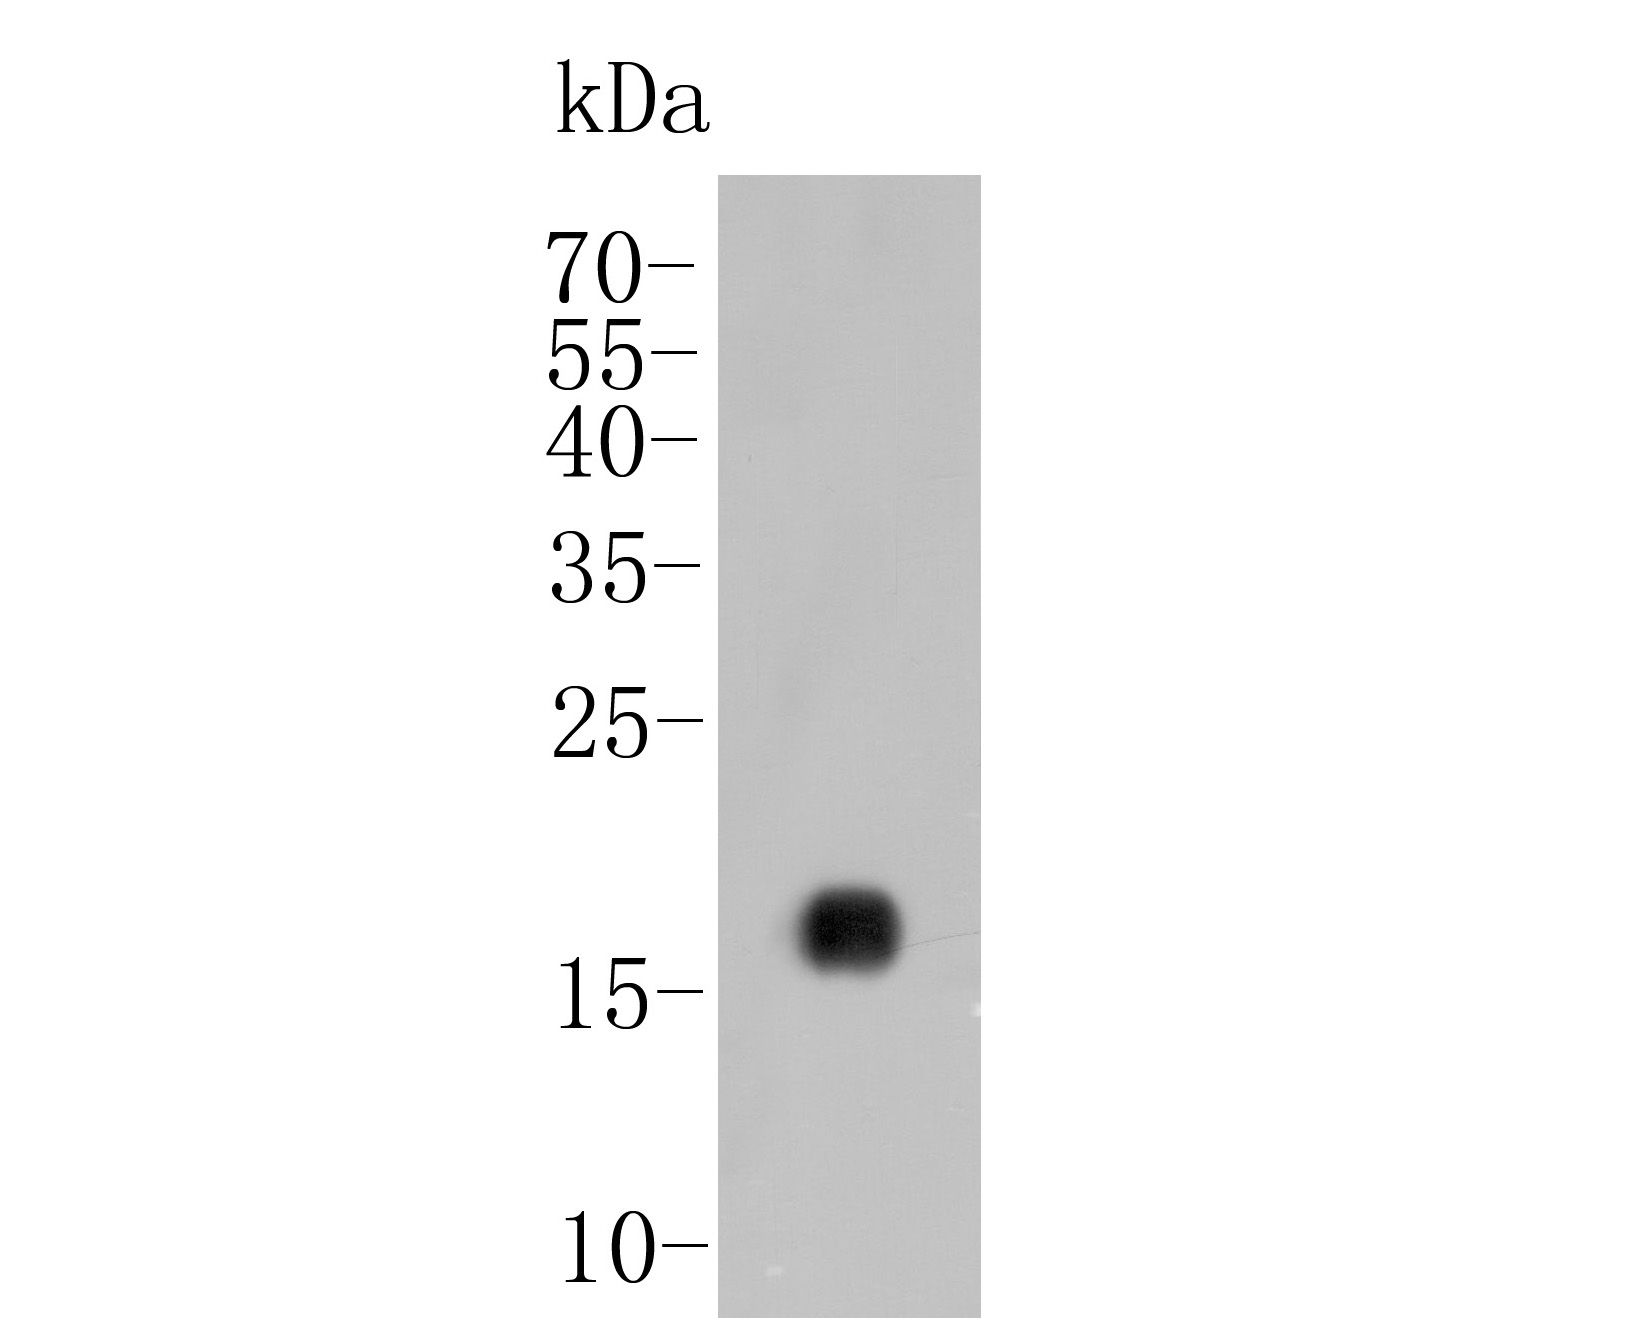 Western blot analysis of IL-17A on recombinant protein lysate. Proteins were transferred to a PVDF membrane and blocked with 5% BSA in PBS for 1 hour at room temperature. The primary antibody (ER1902-37, 1/20,000) was used in 5% BSA at room temperature for 2 hours. Goat Anti-Rabbit IgG - HRP Secondary Antibody (HA1001) at 1:5,000 dilution was used for 1 hour at room temperature.